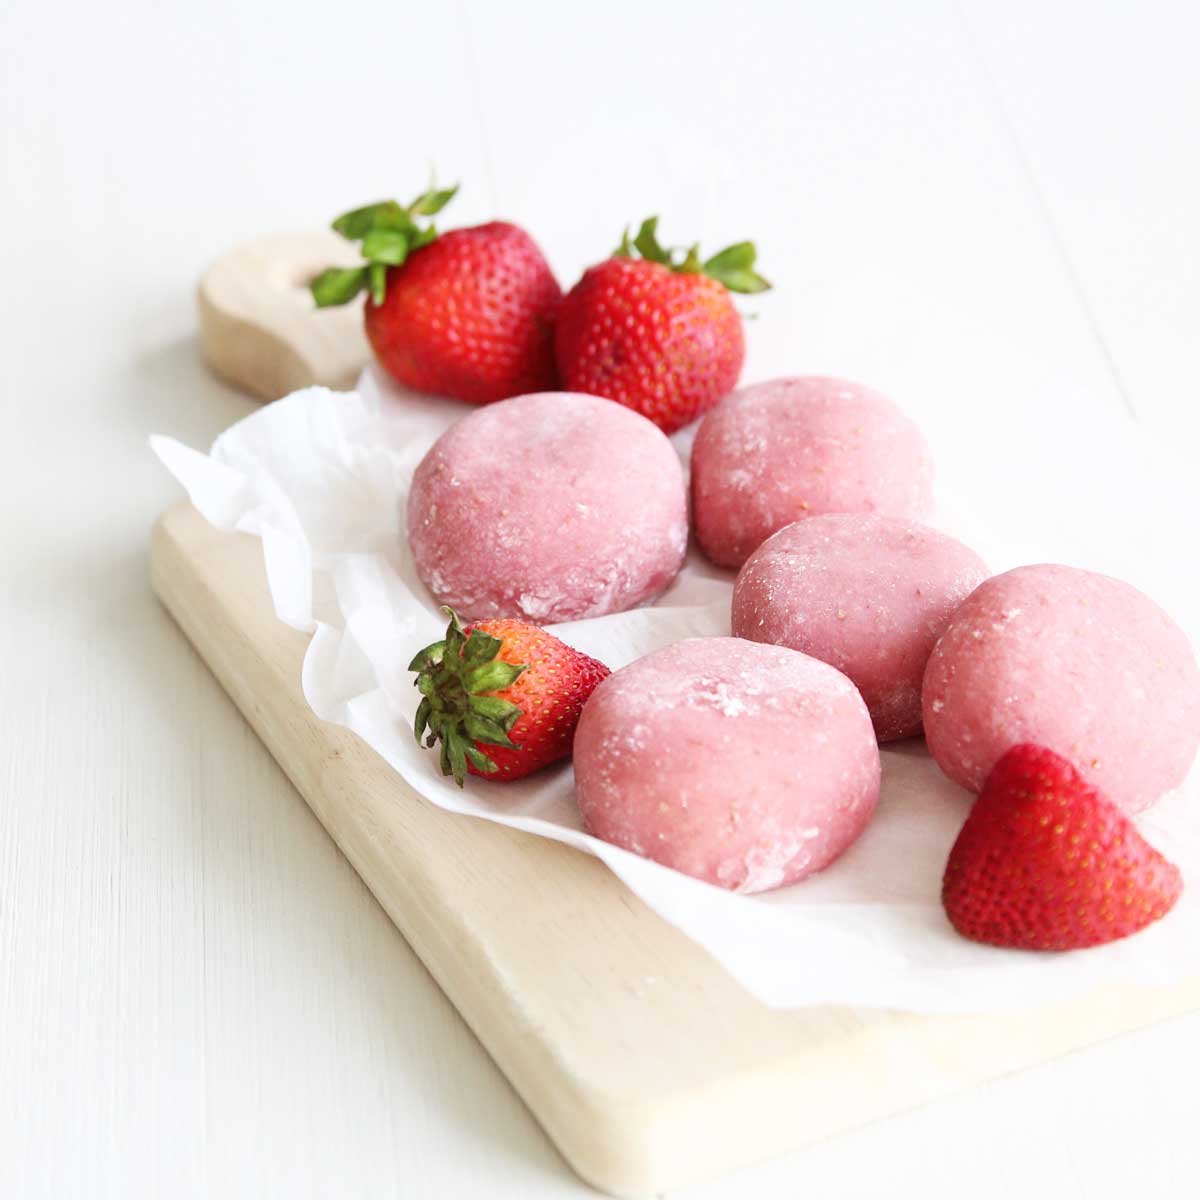 How to Make Healthy Strawberry Mochi (Made in the Microwave) - Raspberry Chocolate Mochi